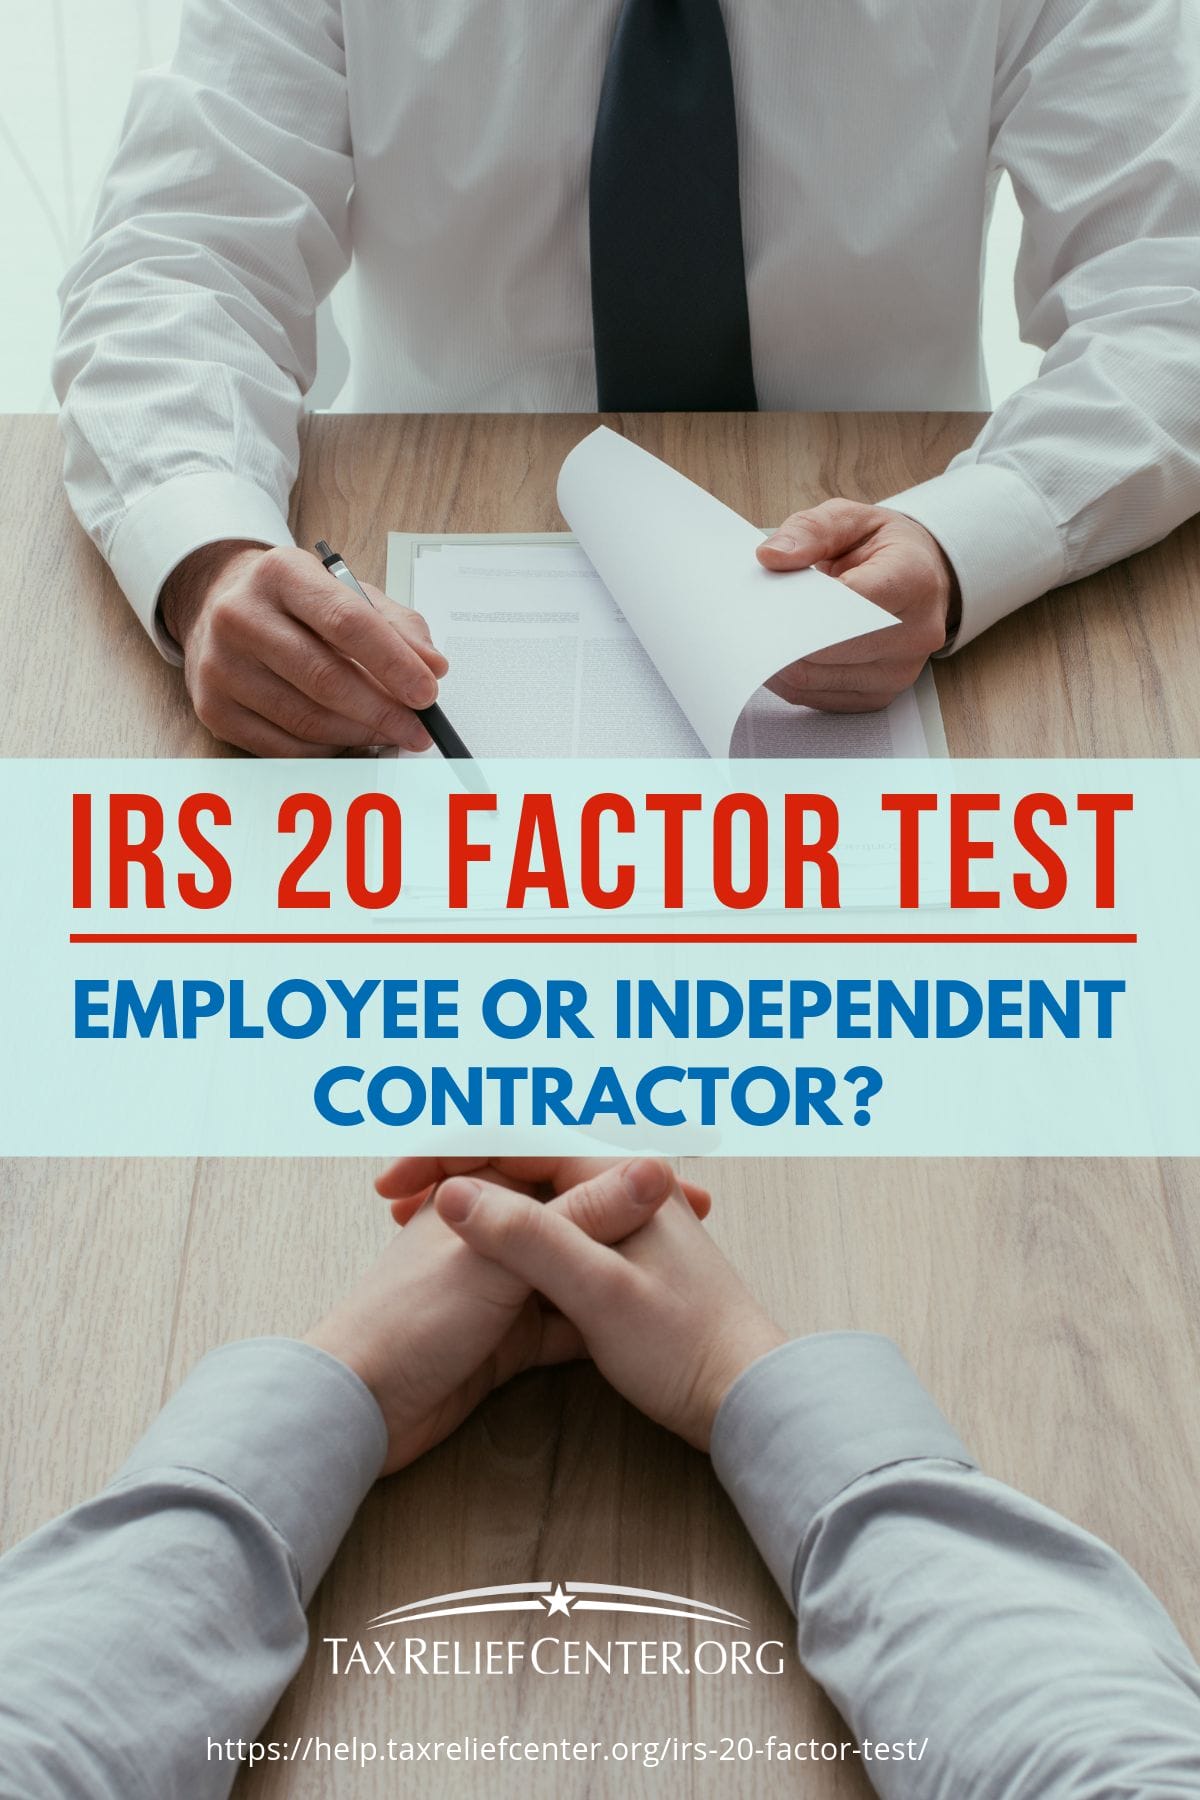 The IRS 20 Factor Test: Employee Or Independent Contractor? https://help.taxreliefcenter.org/irs-20-factor-test/